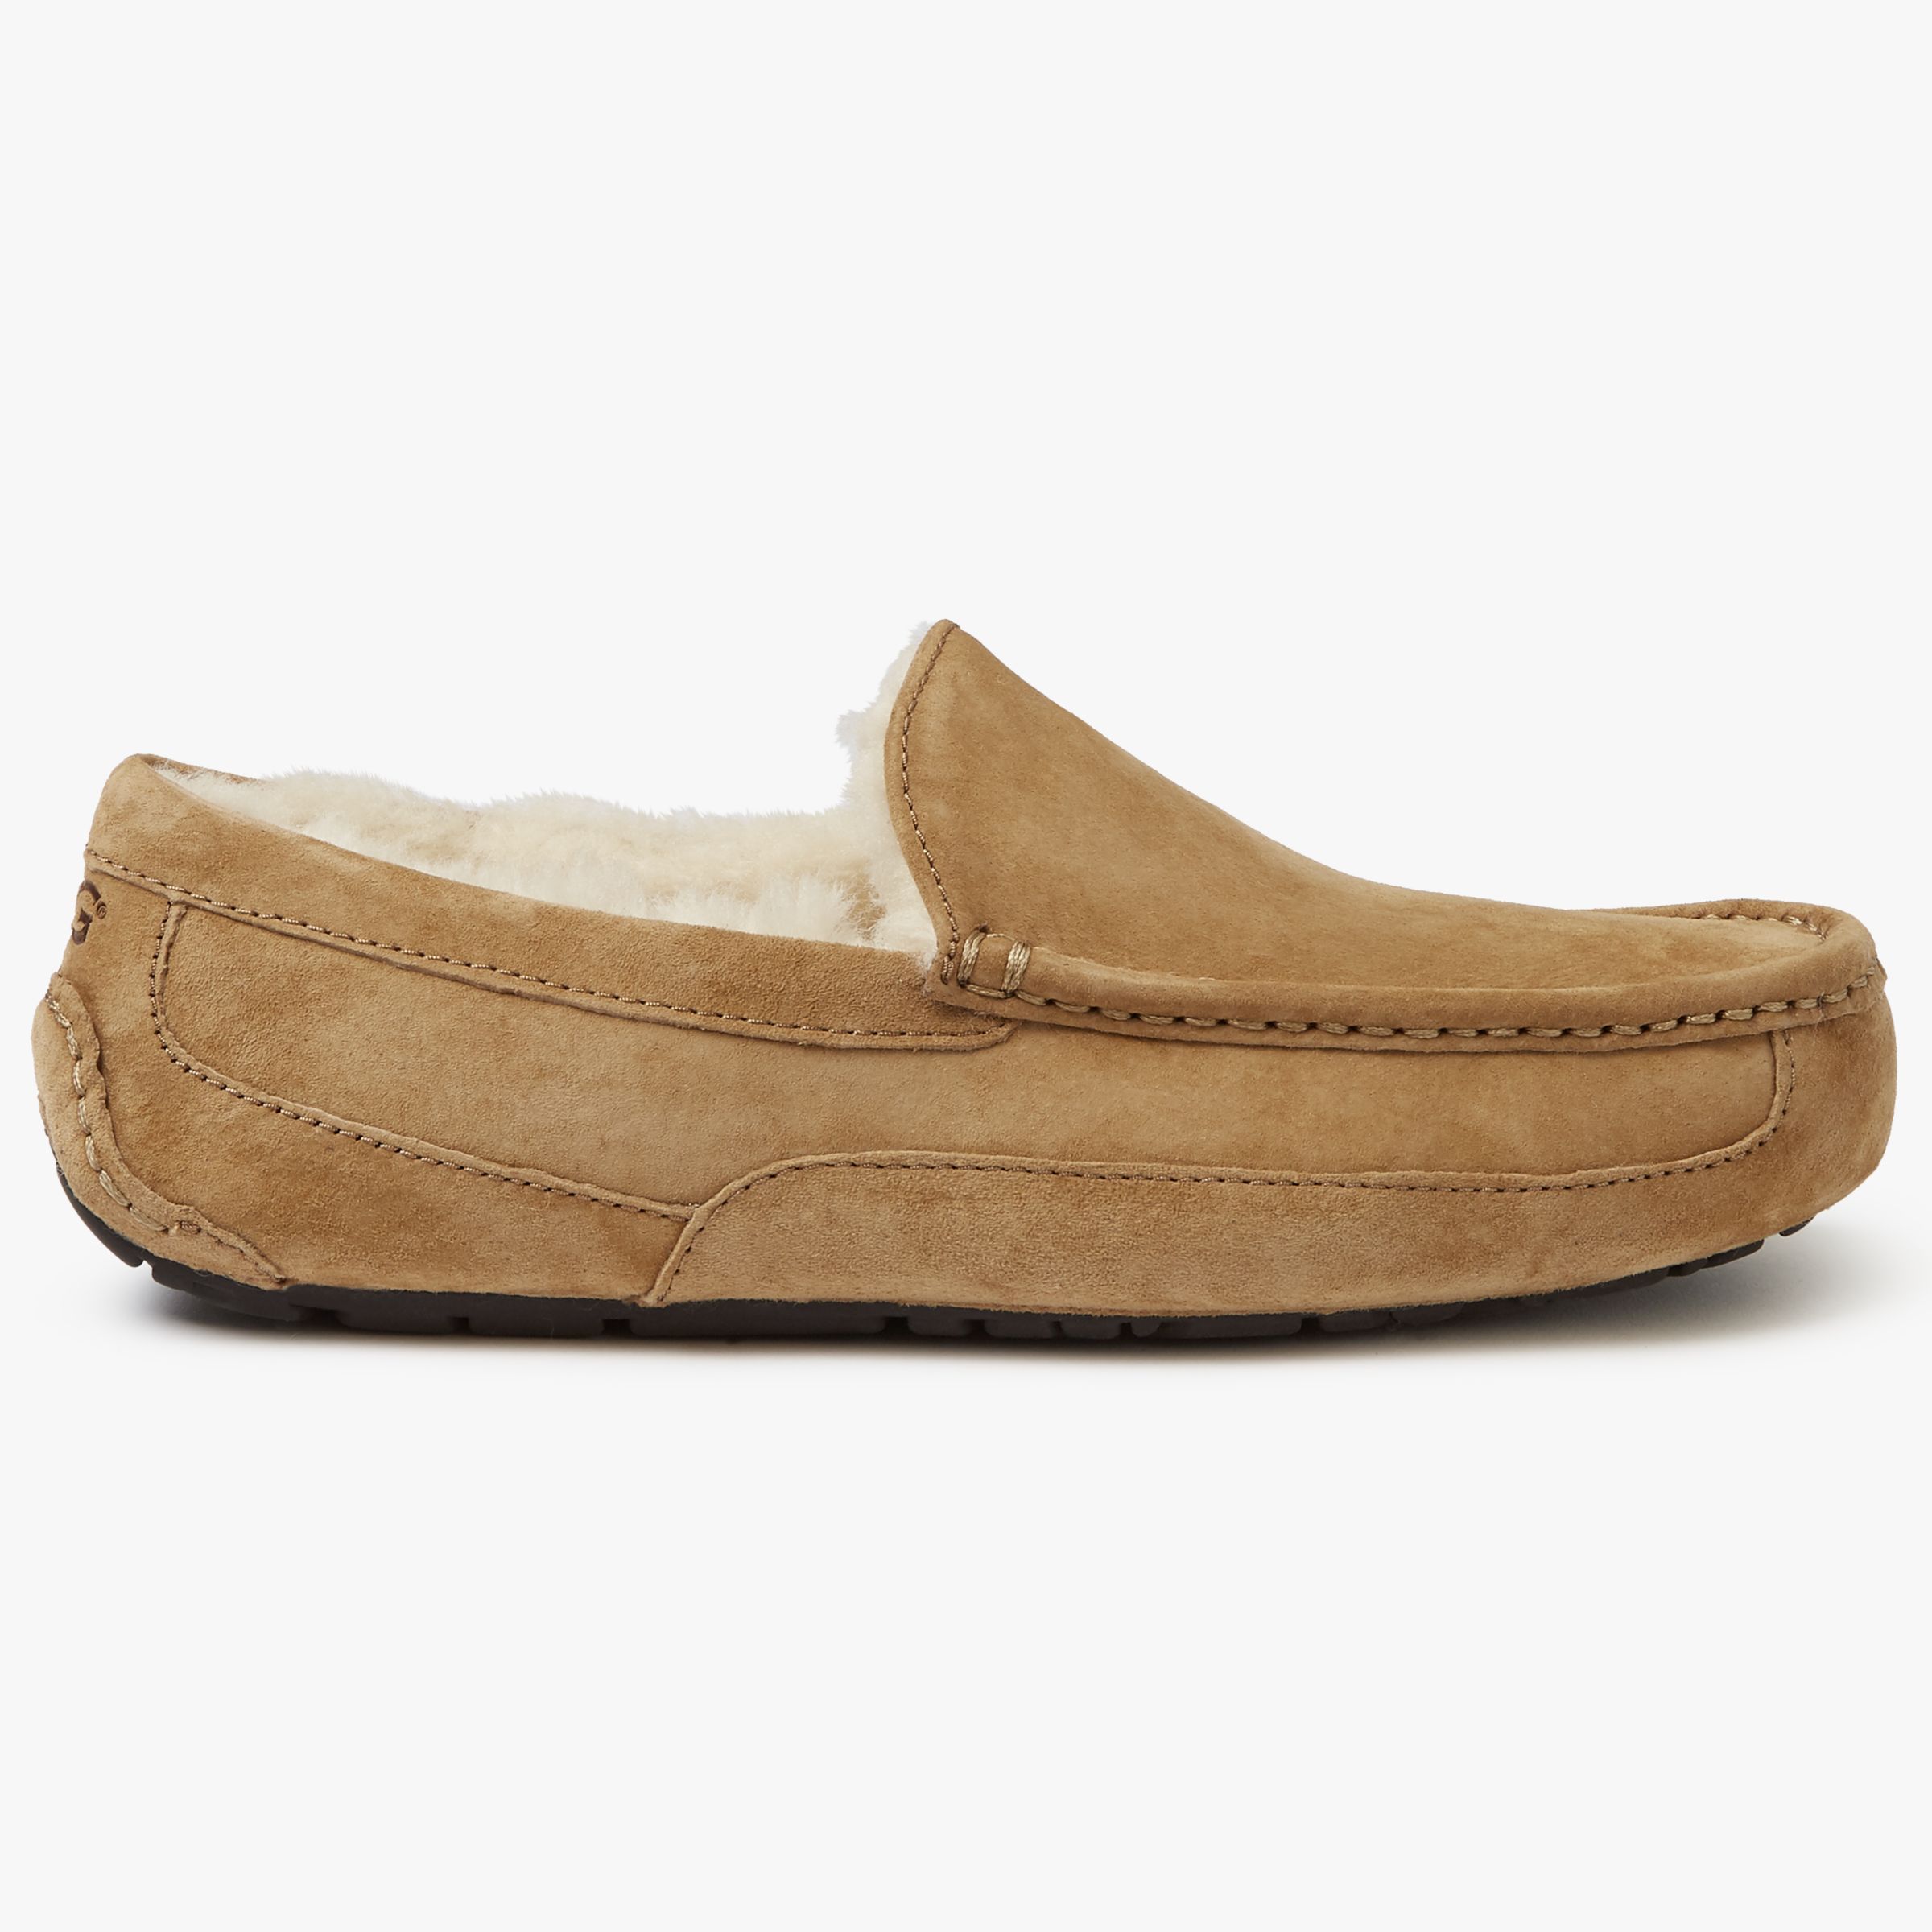 Buy UGG Ascot Moccasin Slippers Online at johnlewis